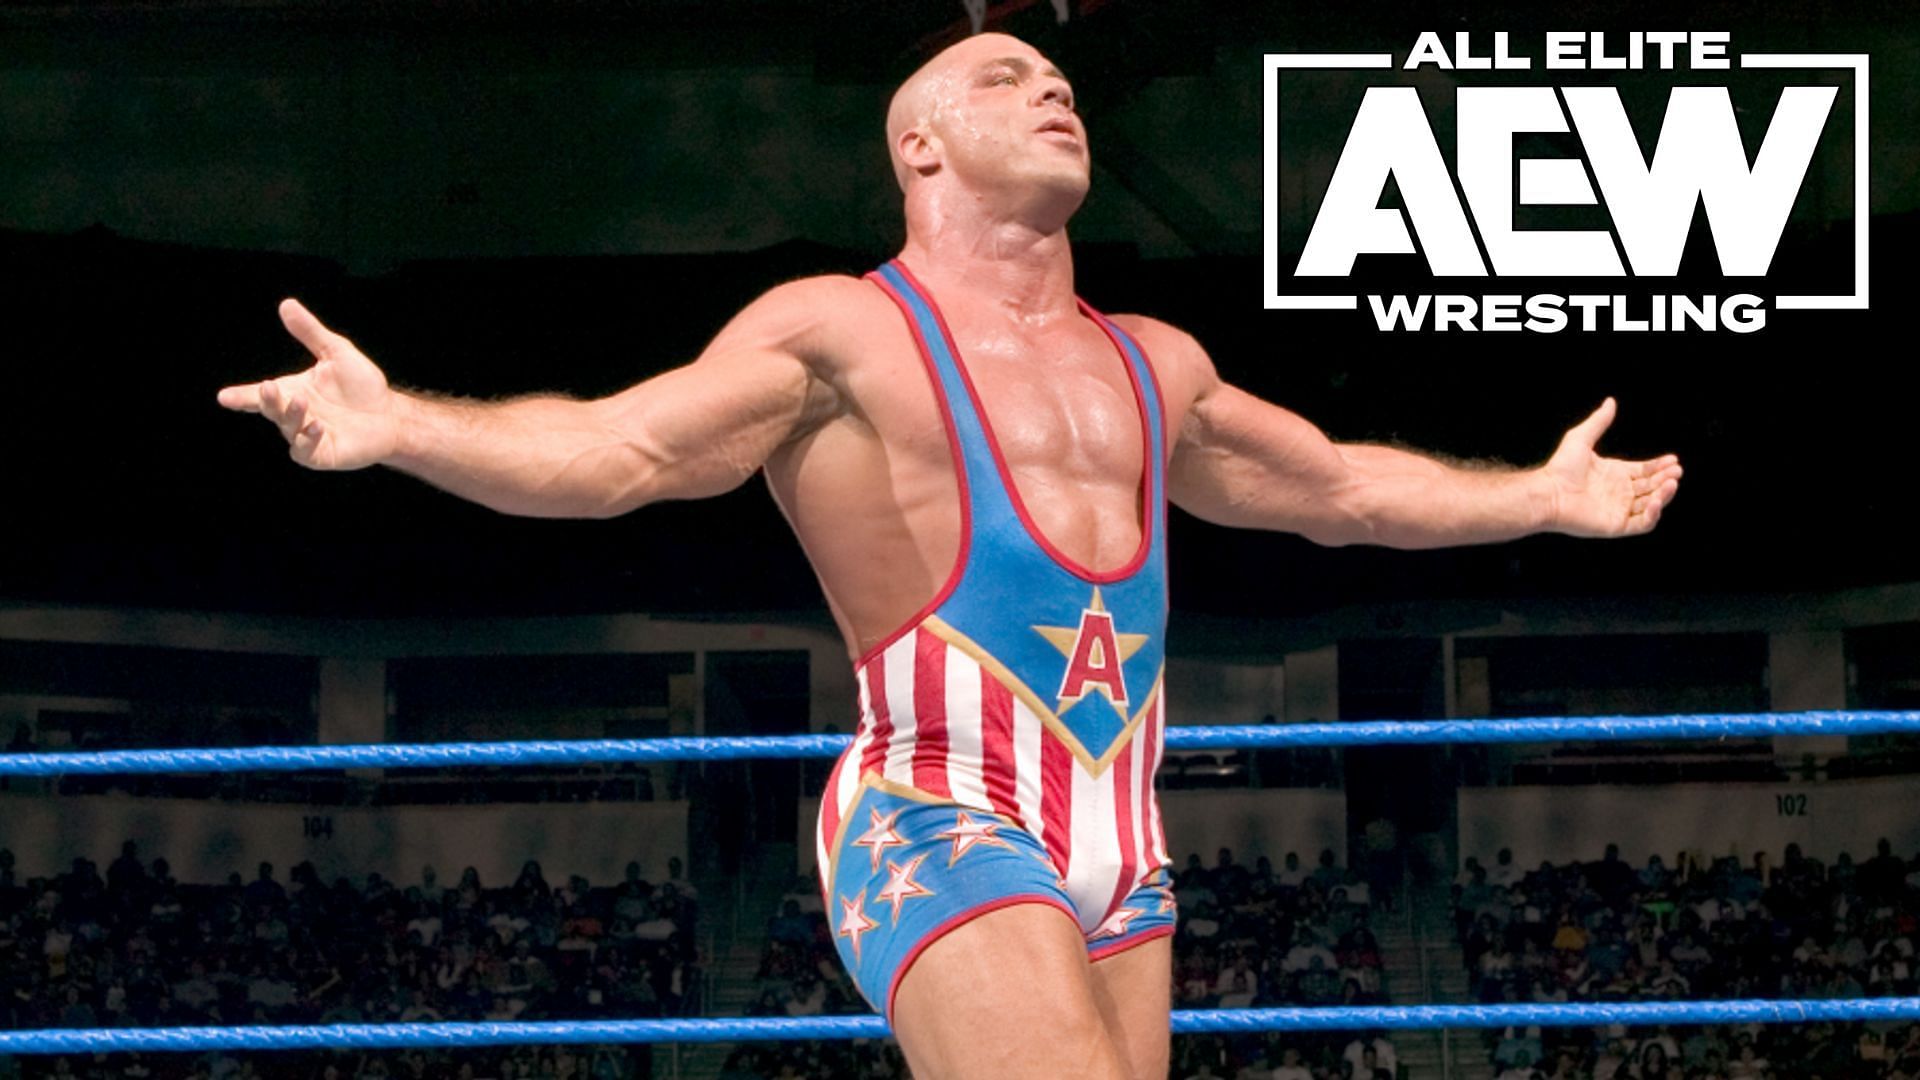 Could Kurt Angle have salvaged this star